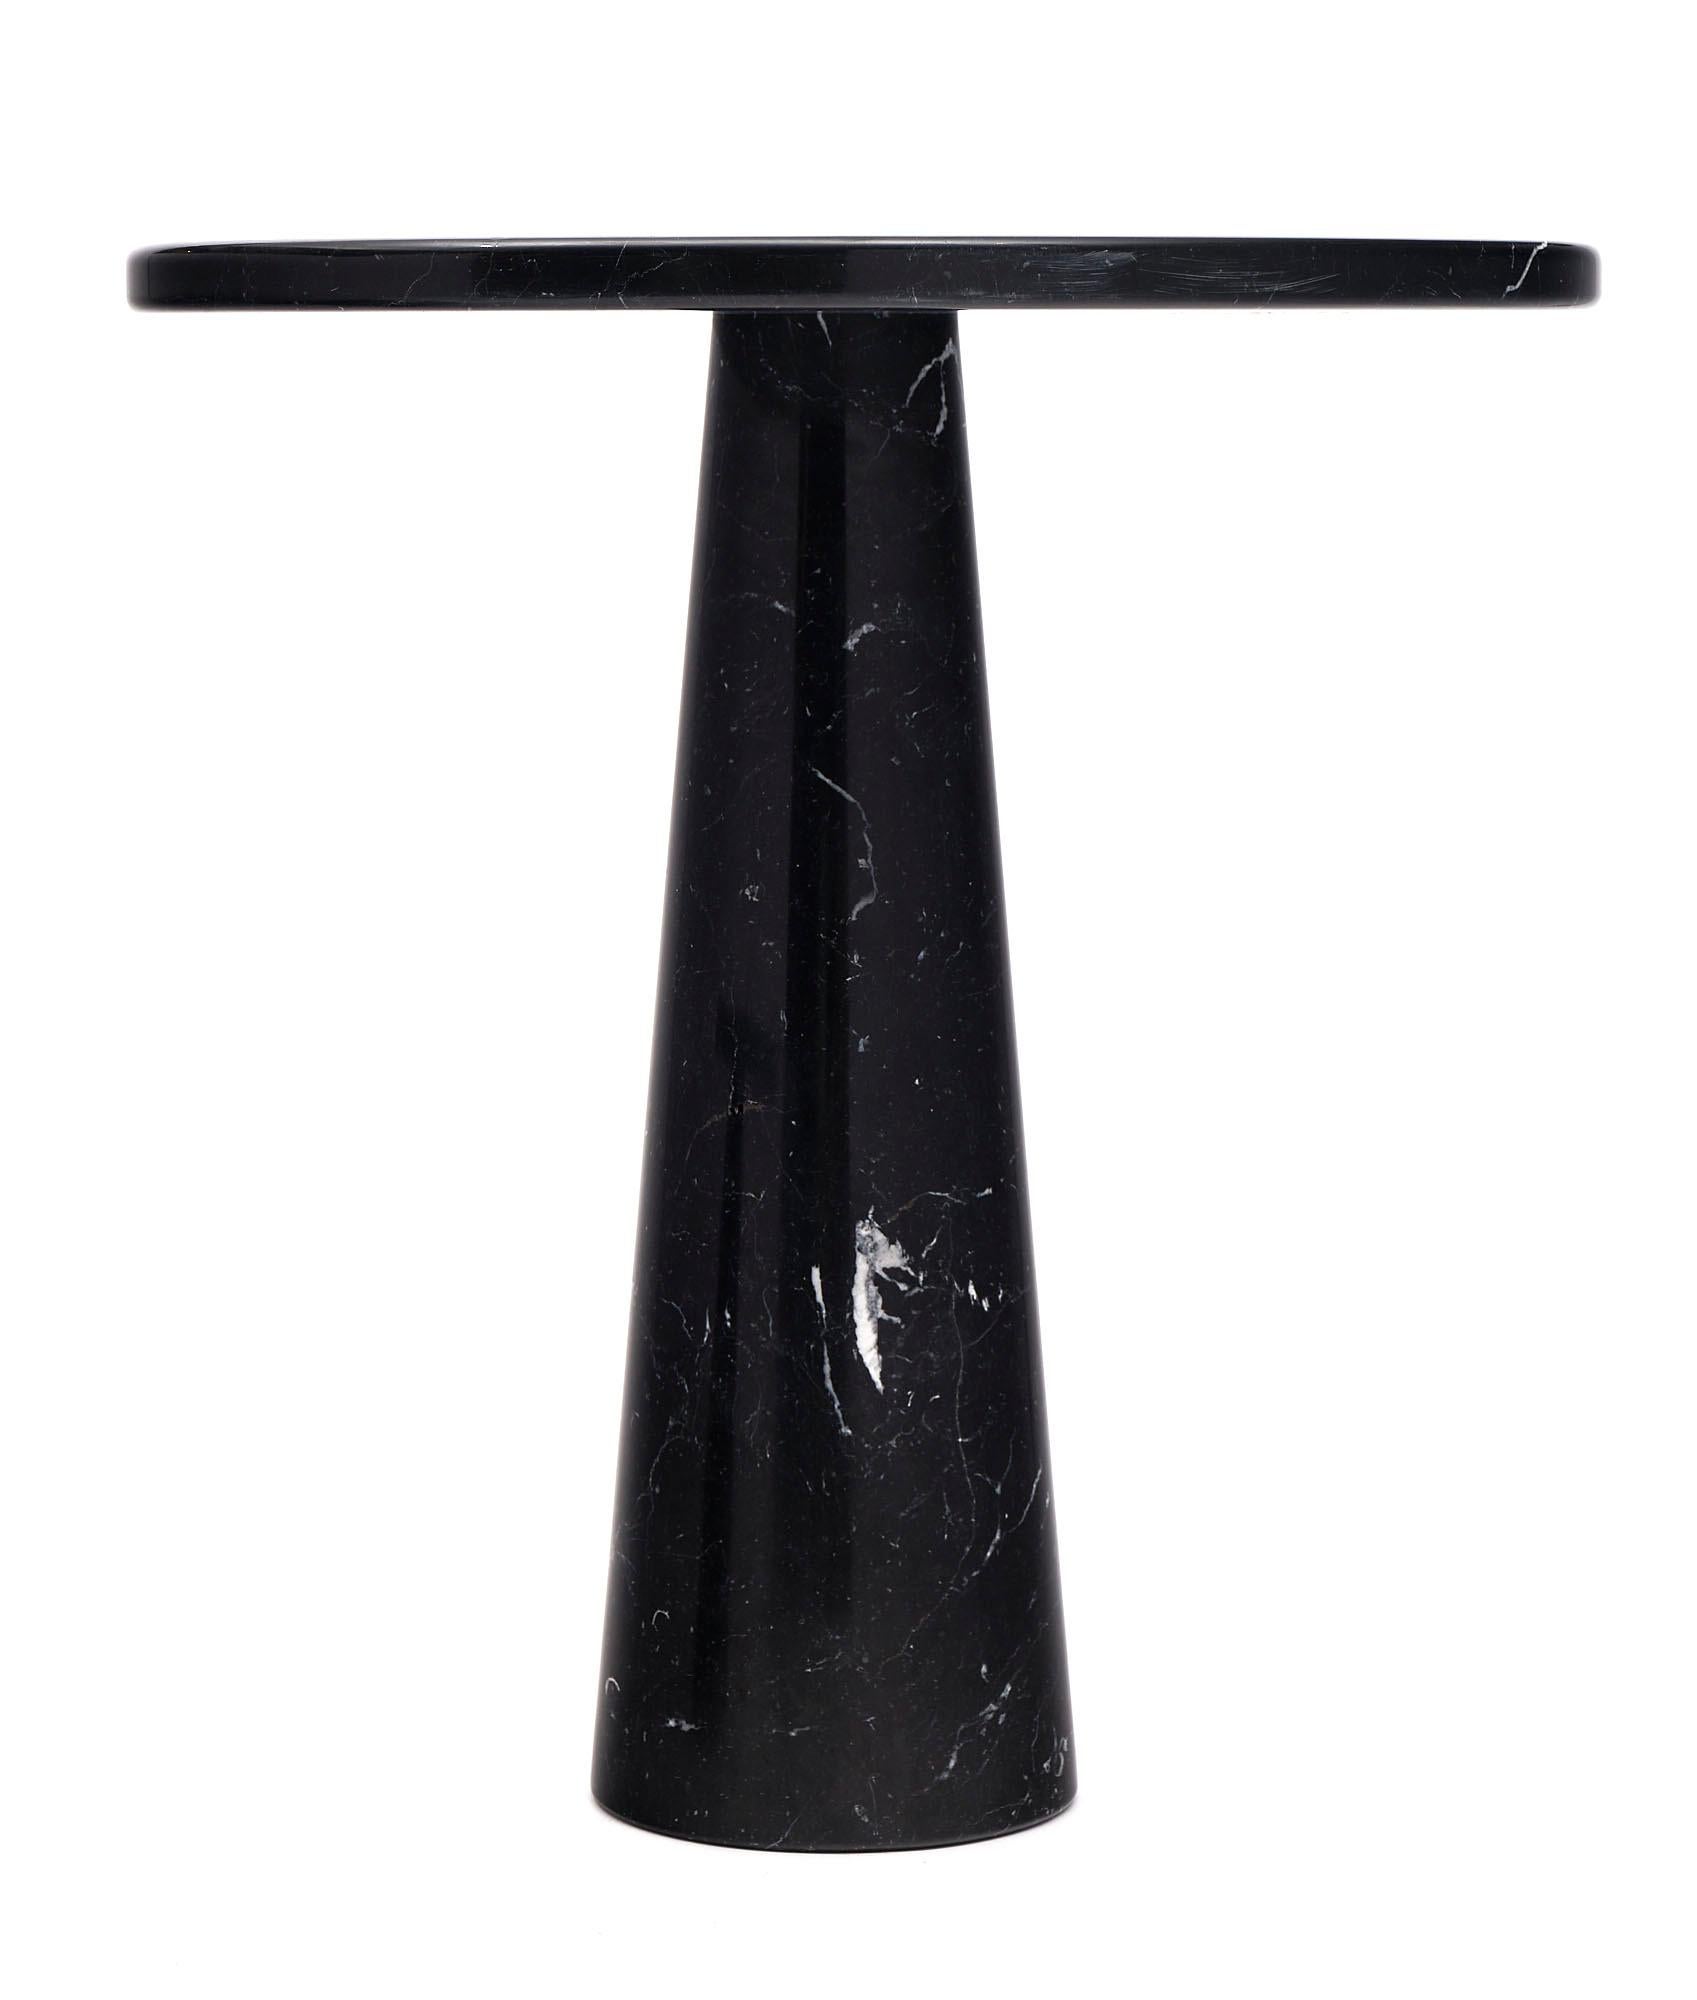 Pair of side tables by Angelo Mangiarotti made of beautiful black marquina marble. Part of the Eros series and produced for Skipper; Italy 1970s. 

Measures: Large table
Height - 28.25”
Length - 26”
Depth - 18”

Small table 
Height -